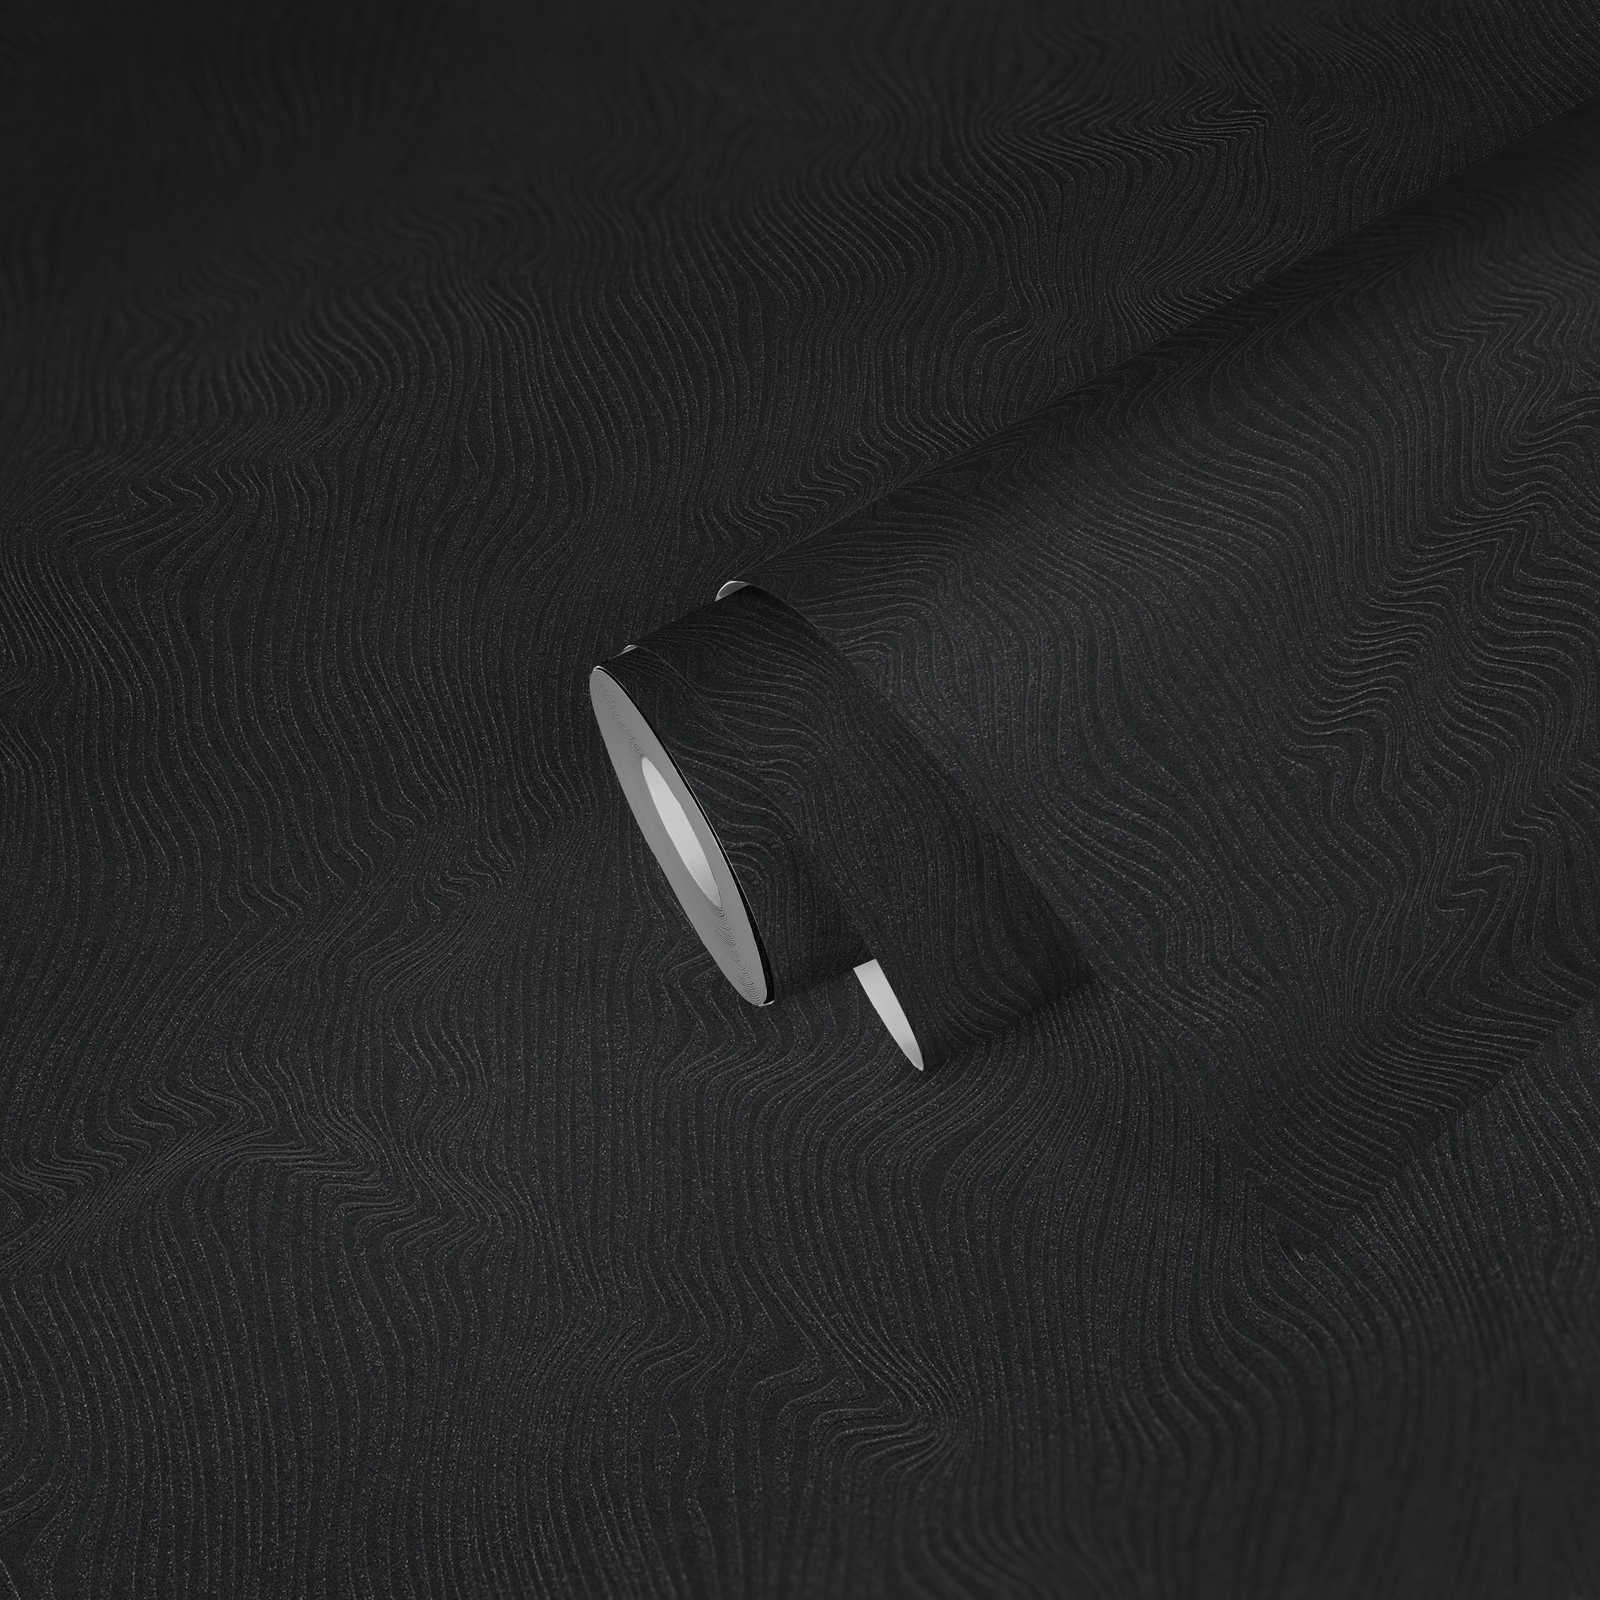             Plain wallpaper with moving line pattern - black
        